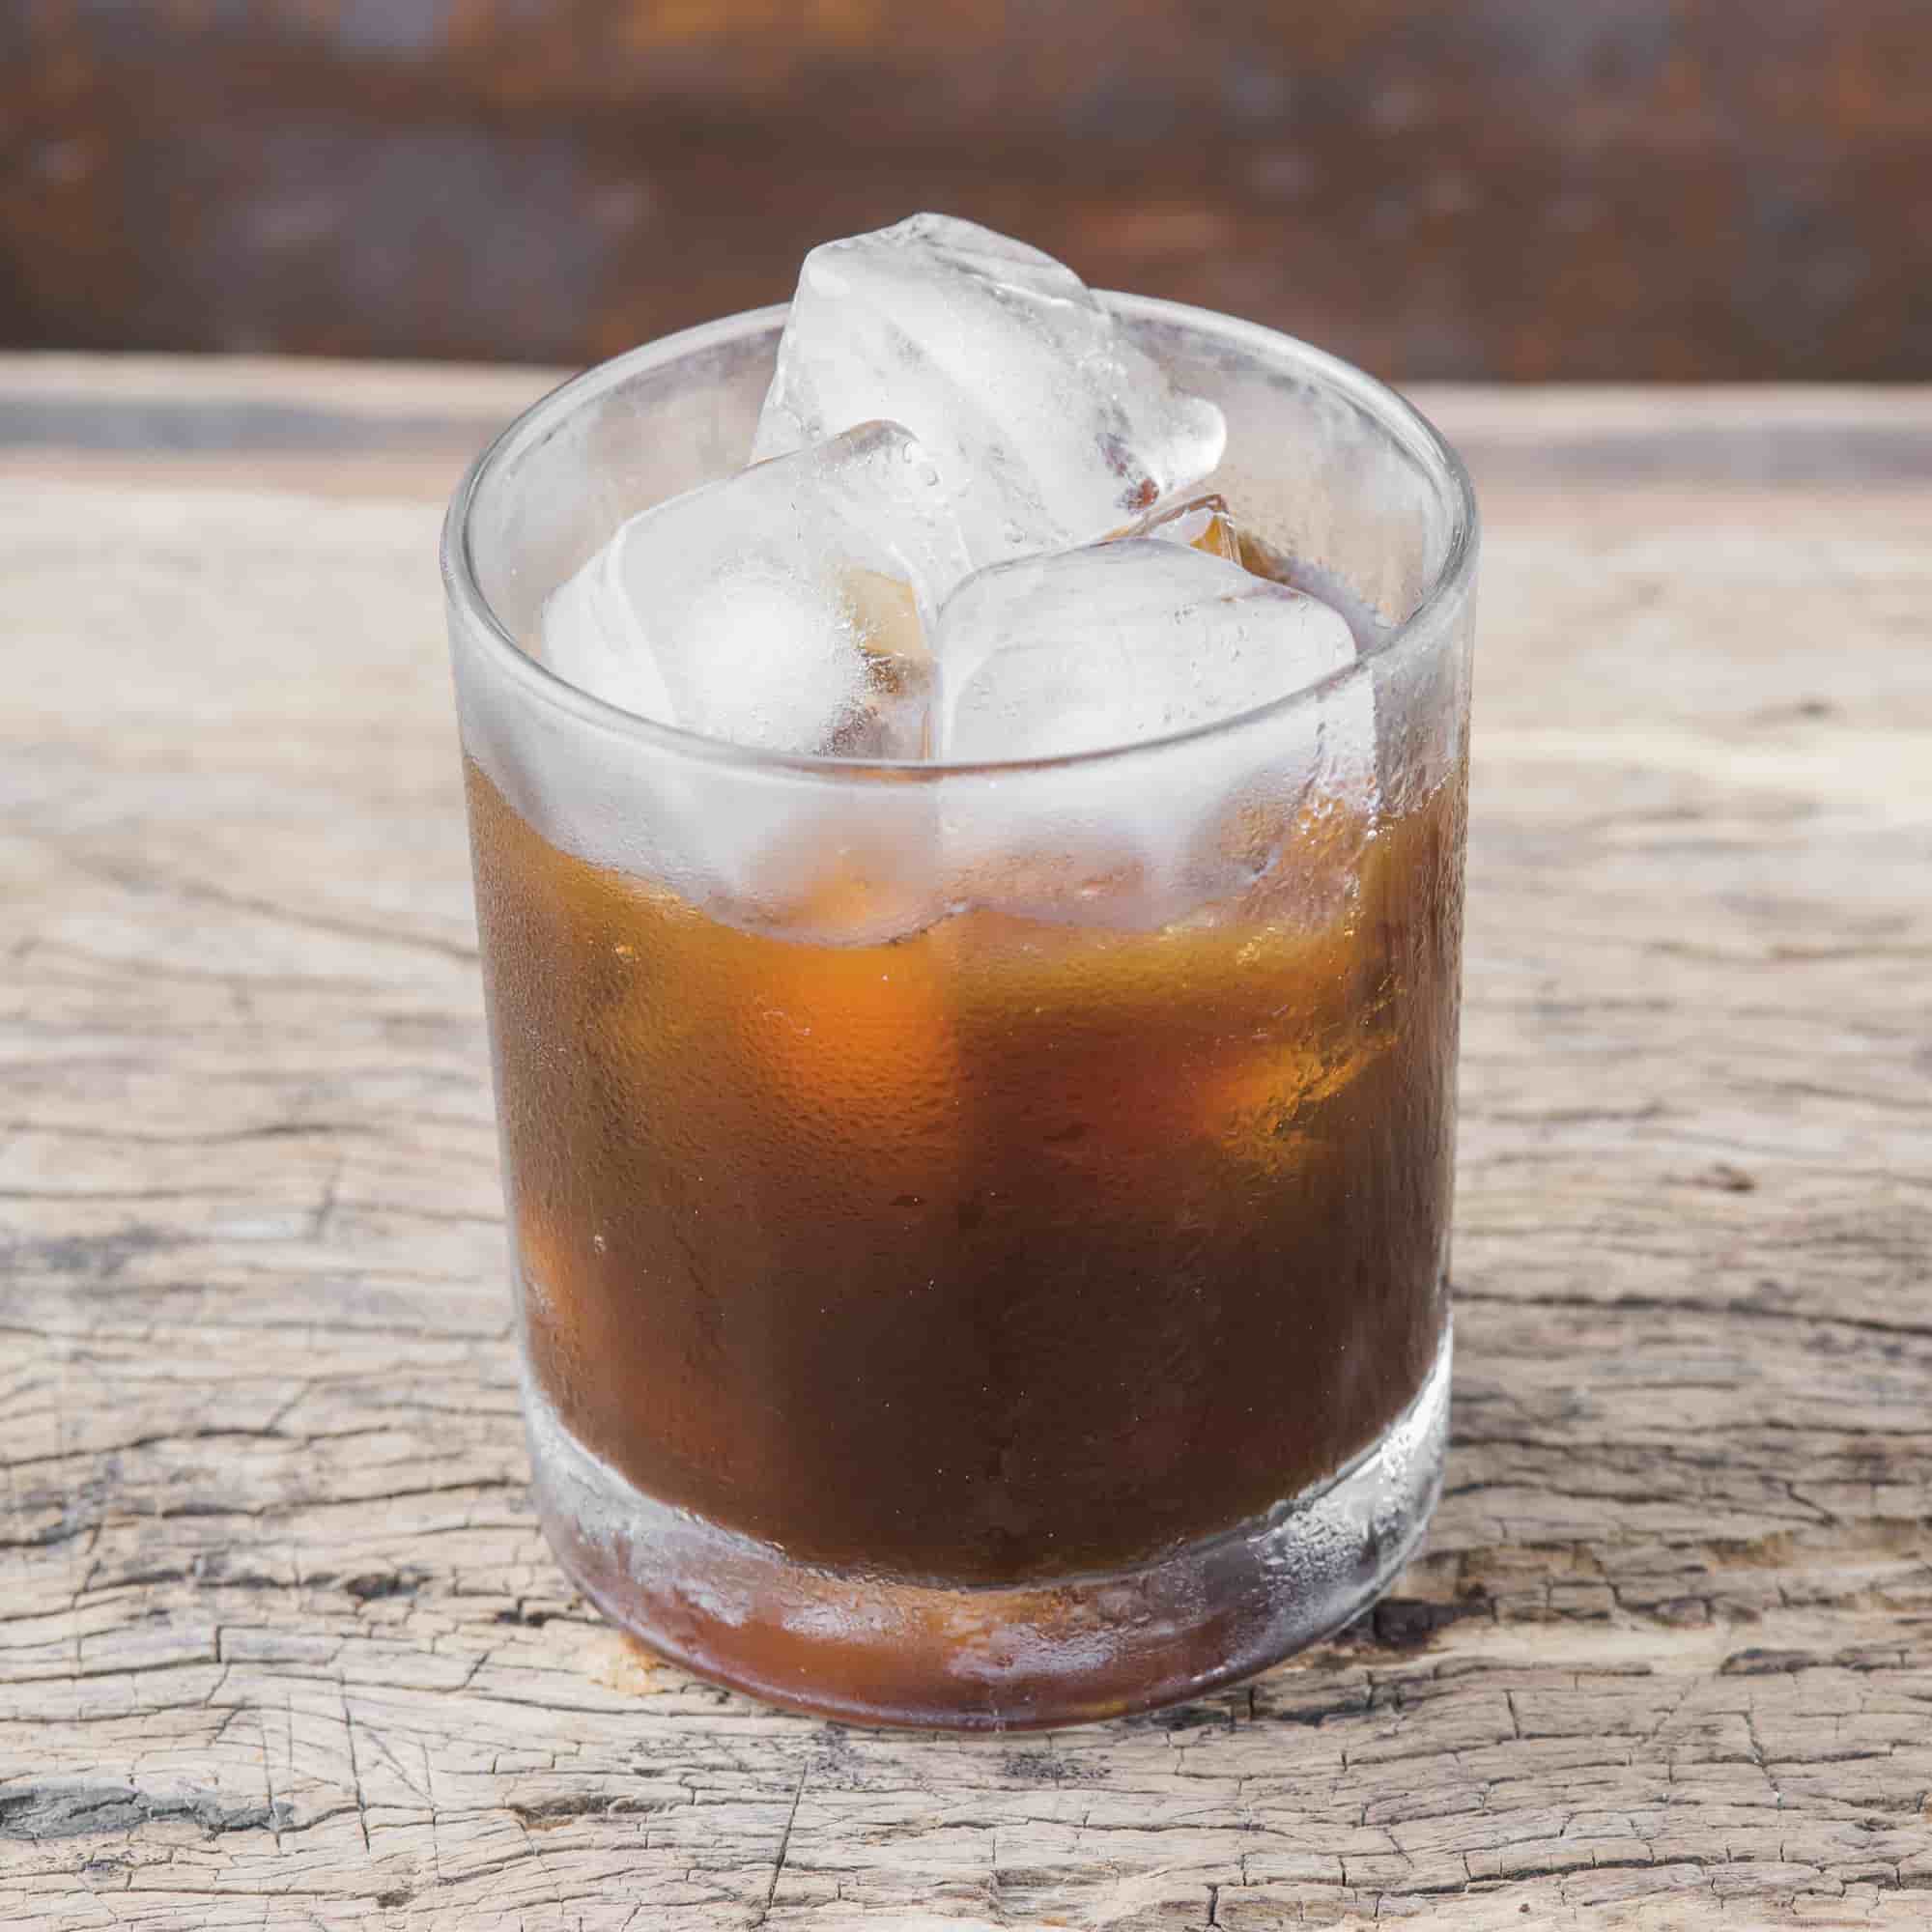 What Are The Different Types of Cold Brew Available?